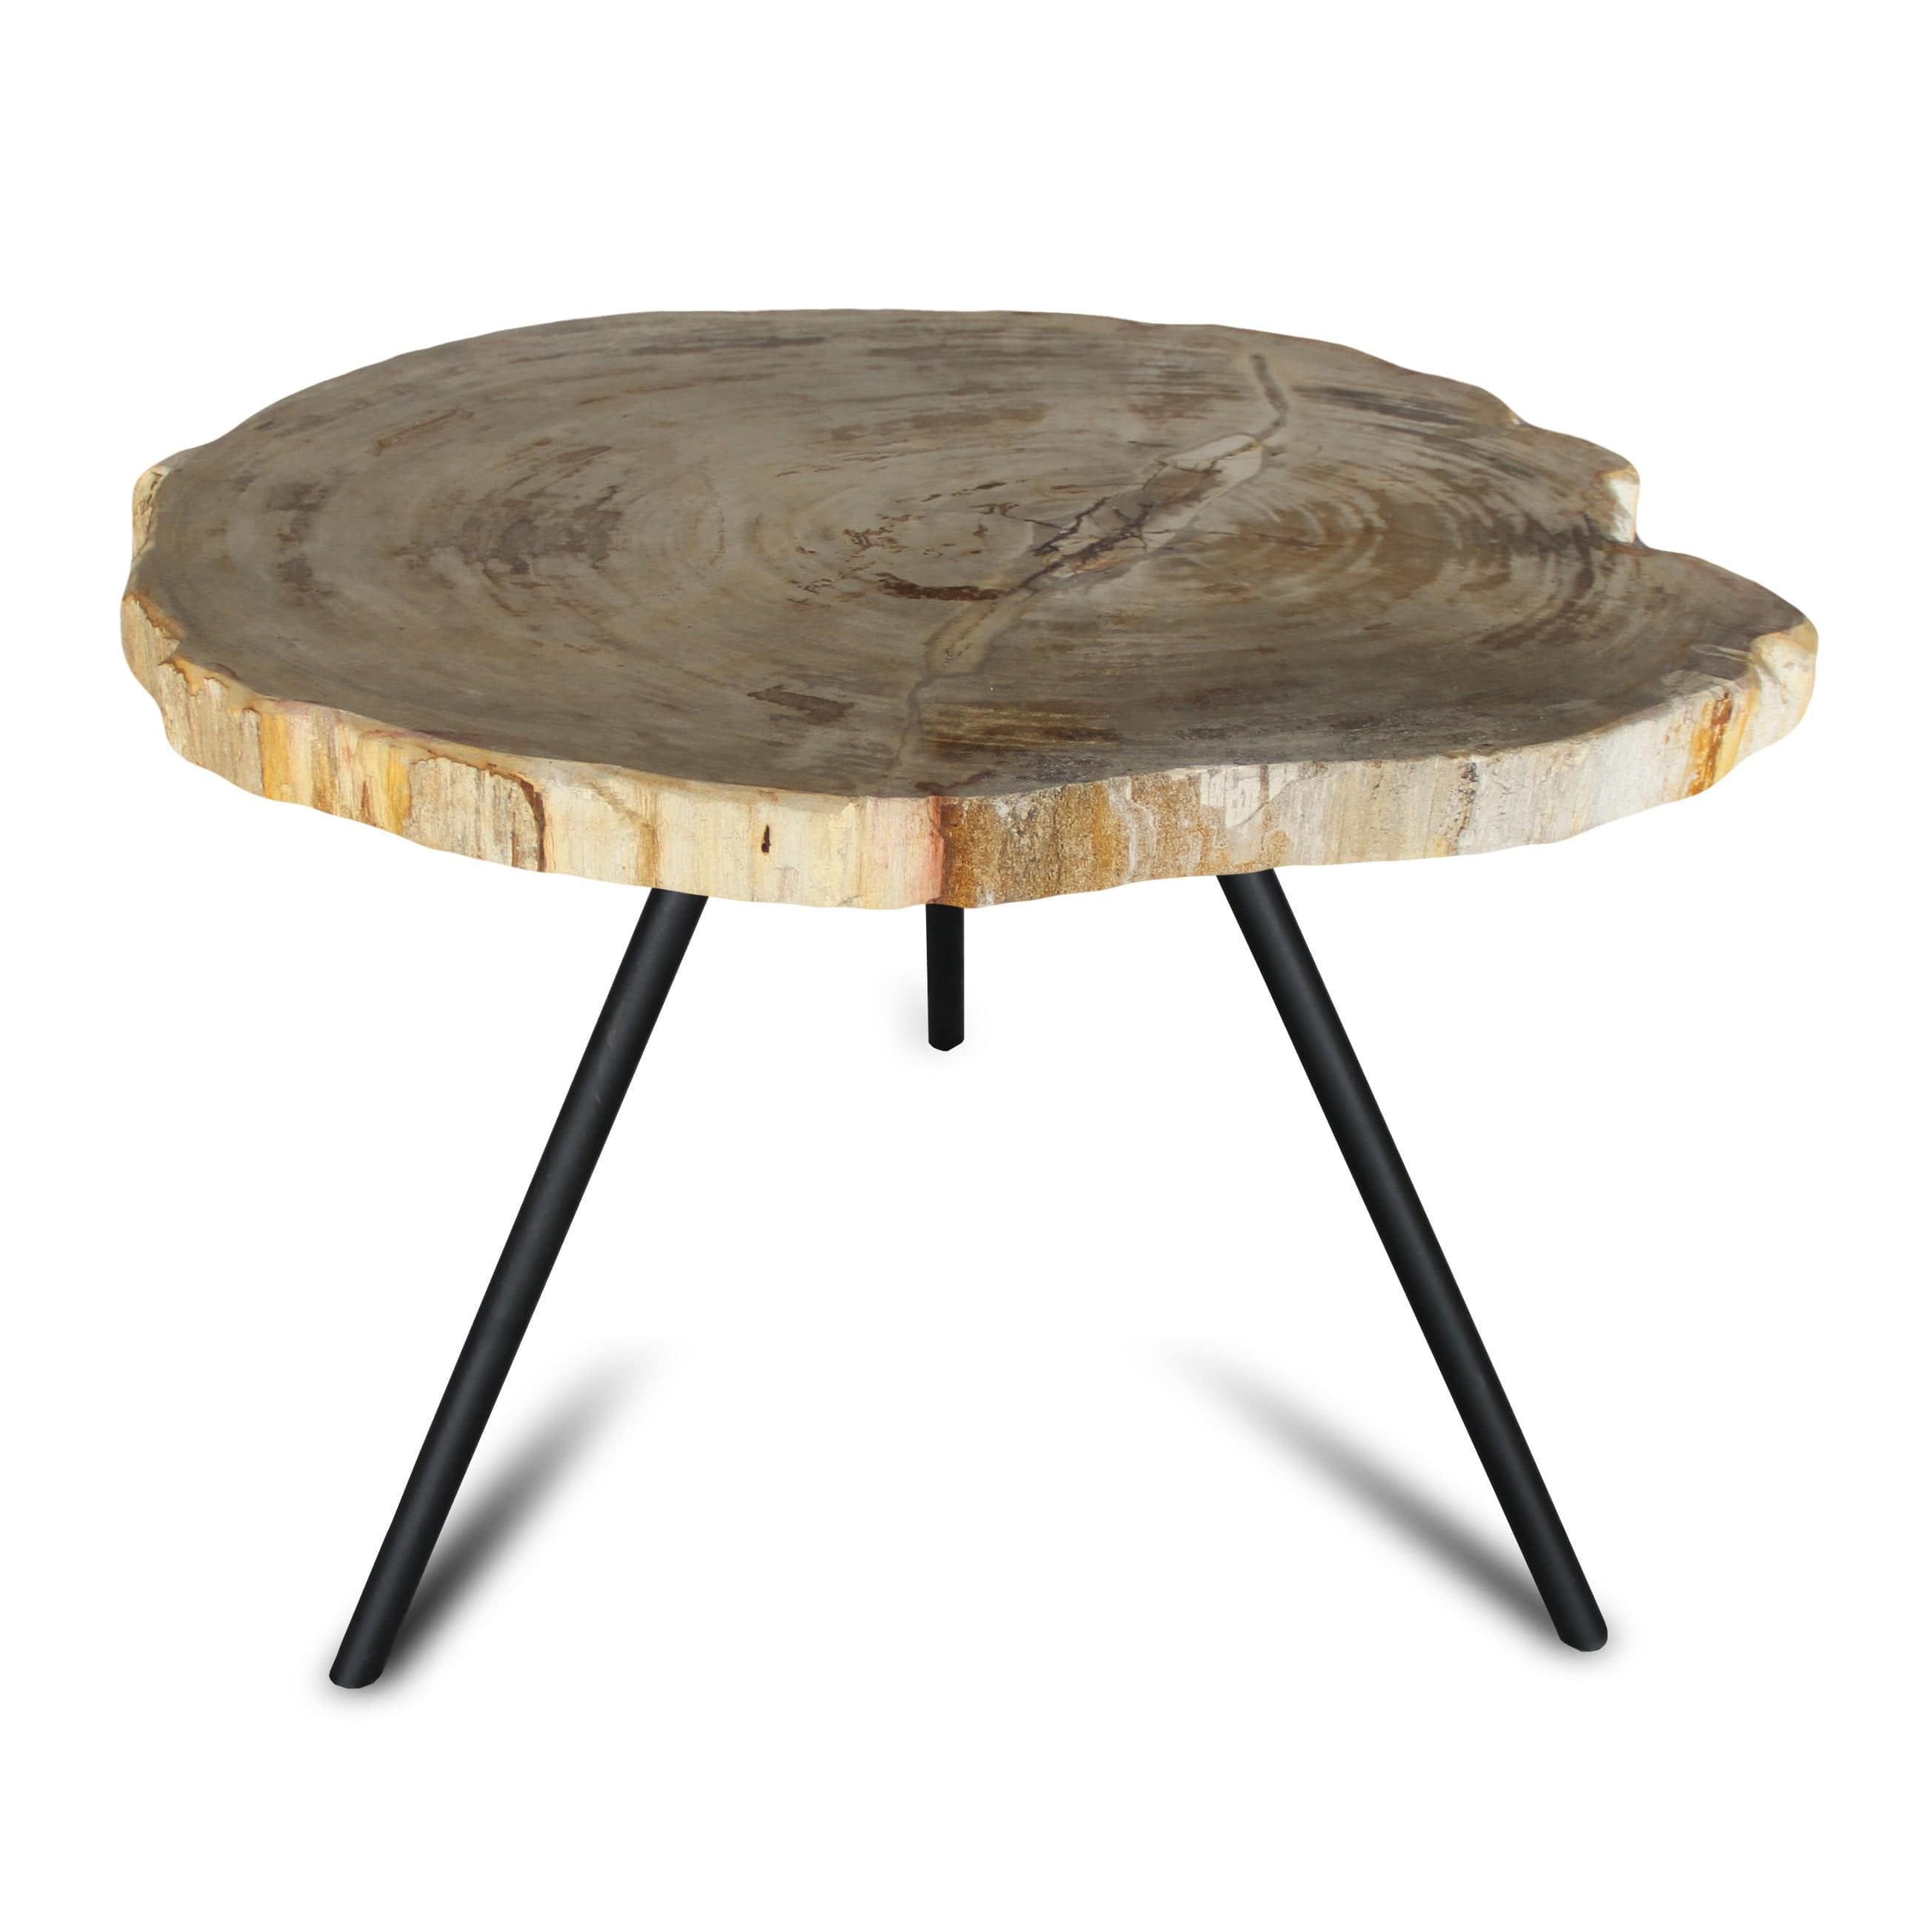 Kalifano Petrified Wood Petrified Wood Round Slice Side Table from Indonesia - 25" / 68 lbs PWT2600.001